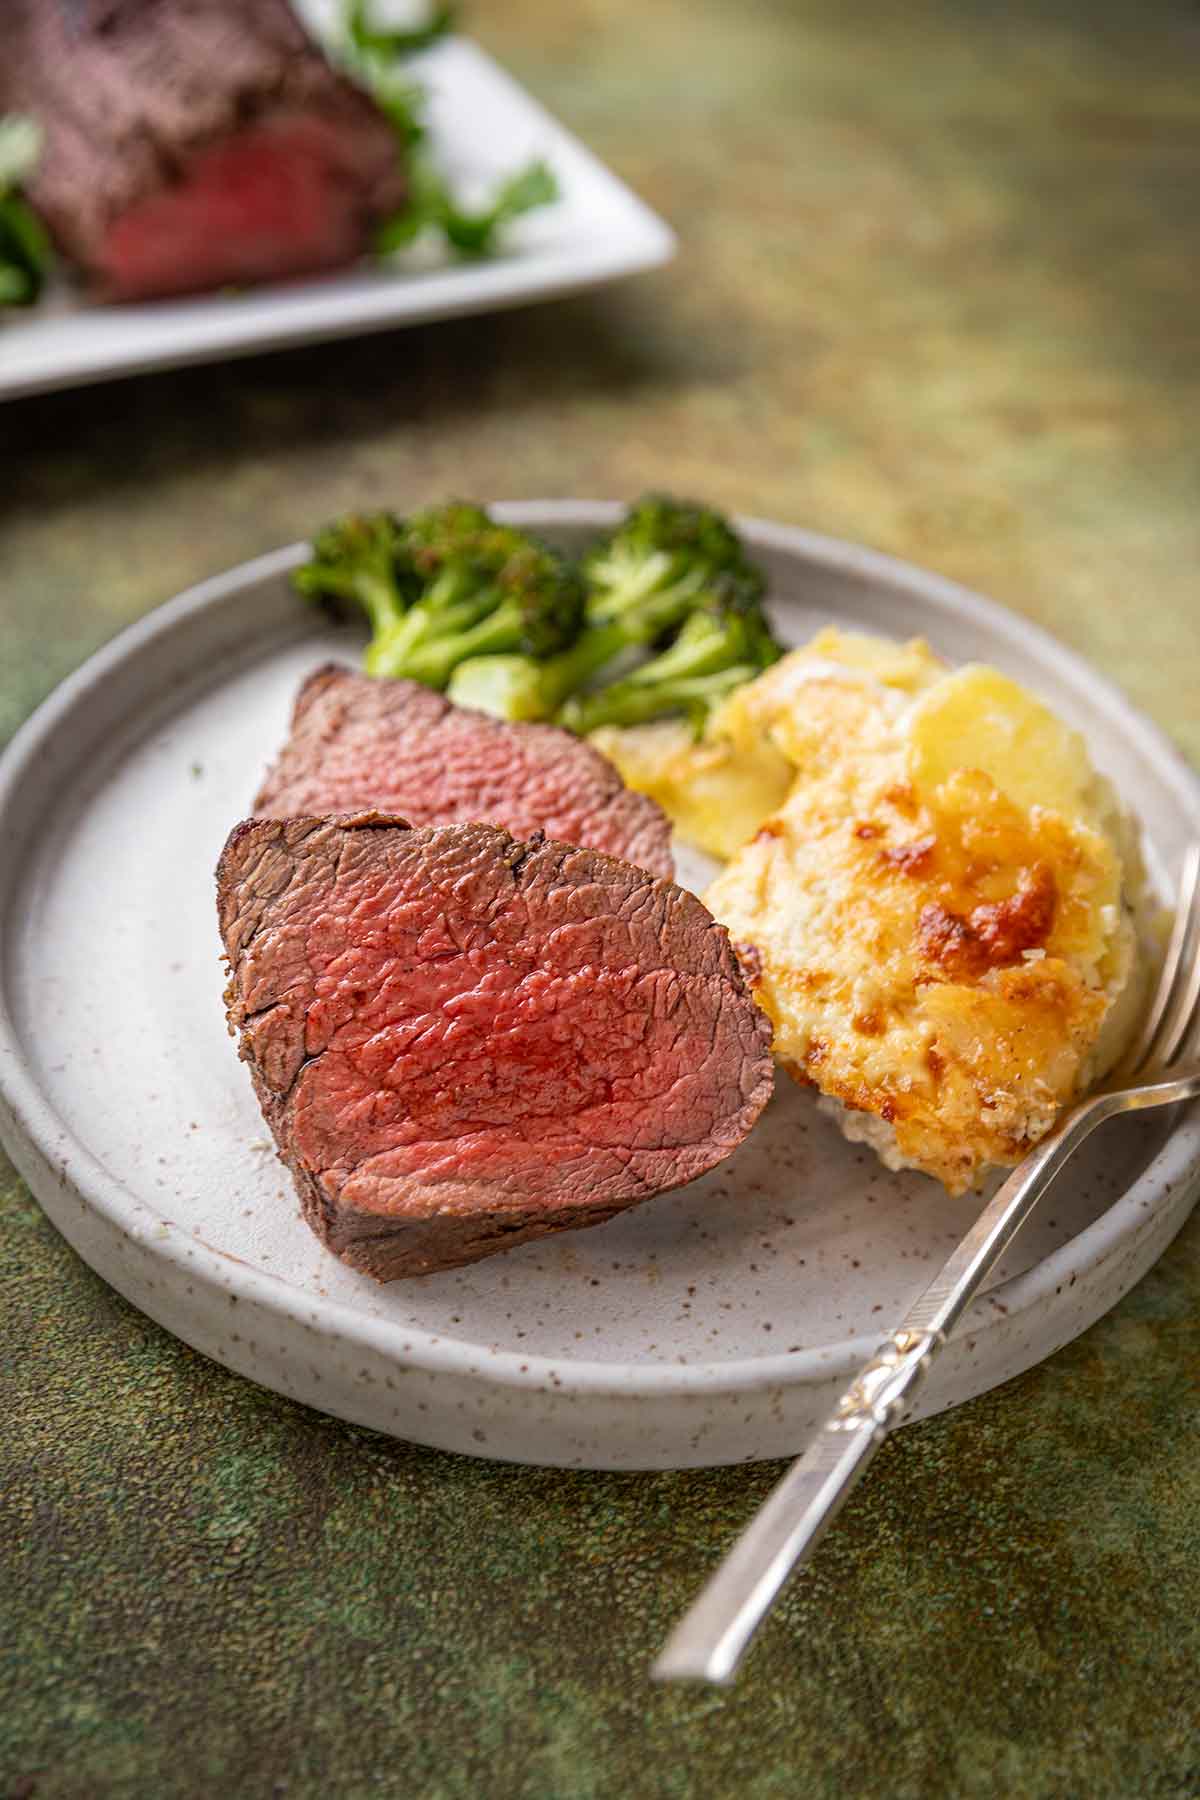 Slices of spiced beef tenderloin roast on a plate with cheesy potatoes and roasted broccoli.